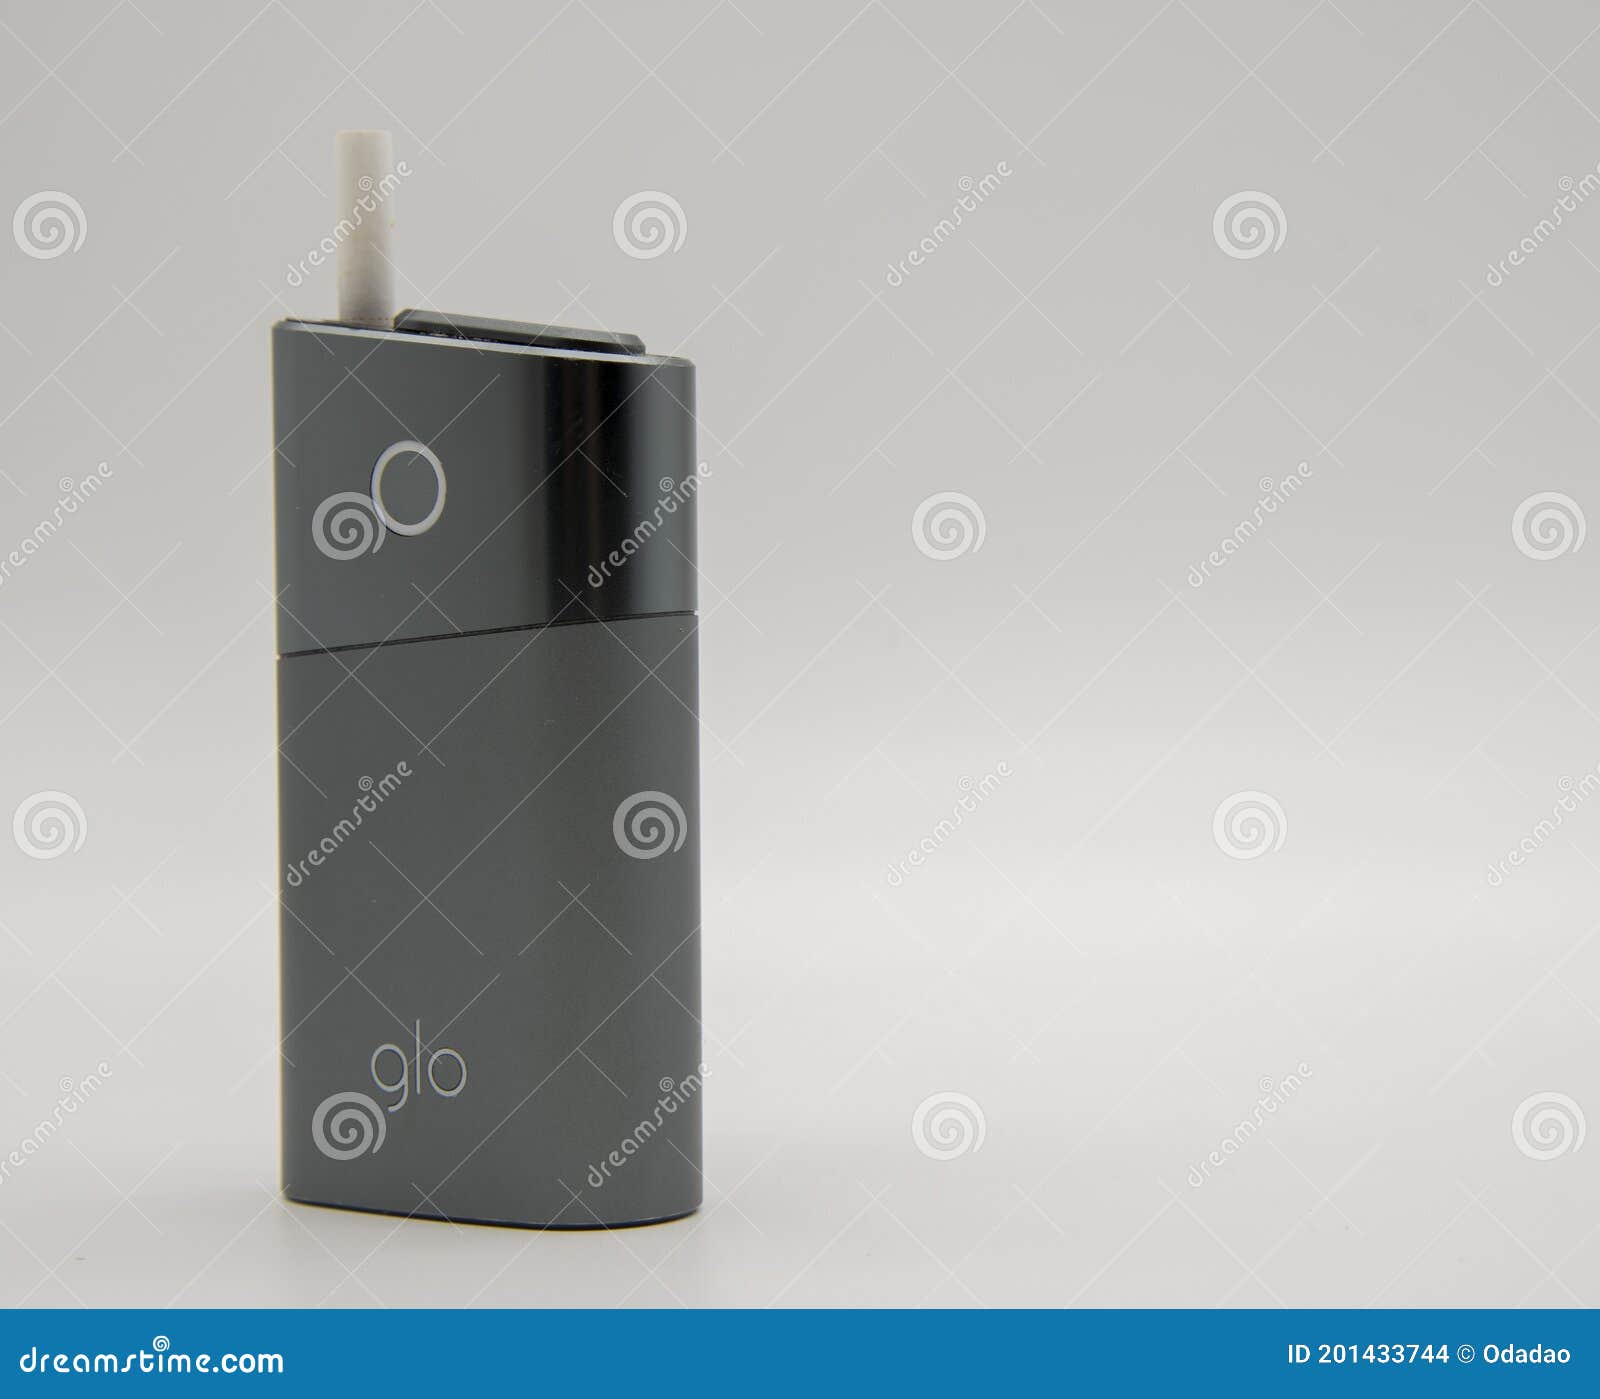 GLO Tobacco Heater, an Alternative Method of Nicotine Use Editorial Stock  Image - Image of electronic, cigarette: 201433744